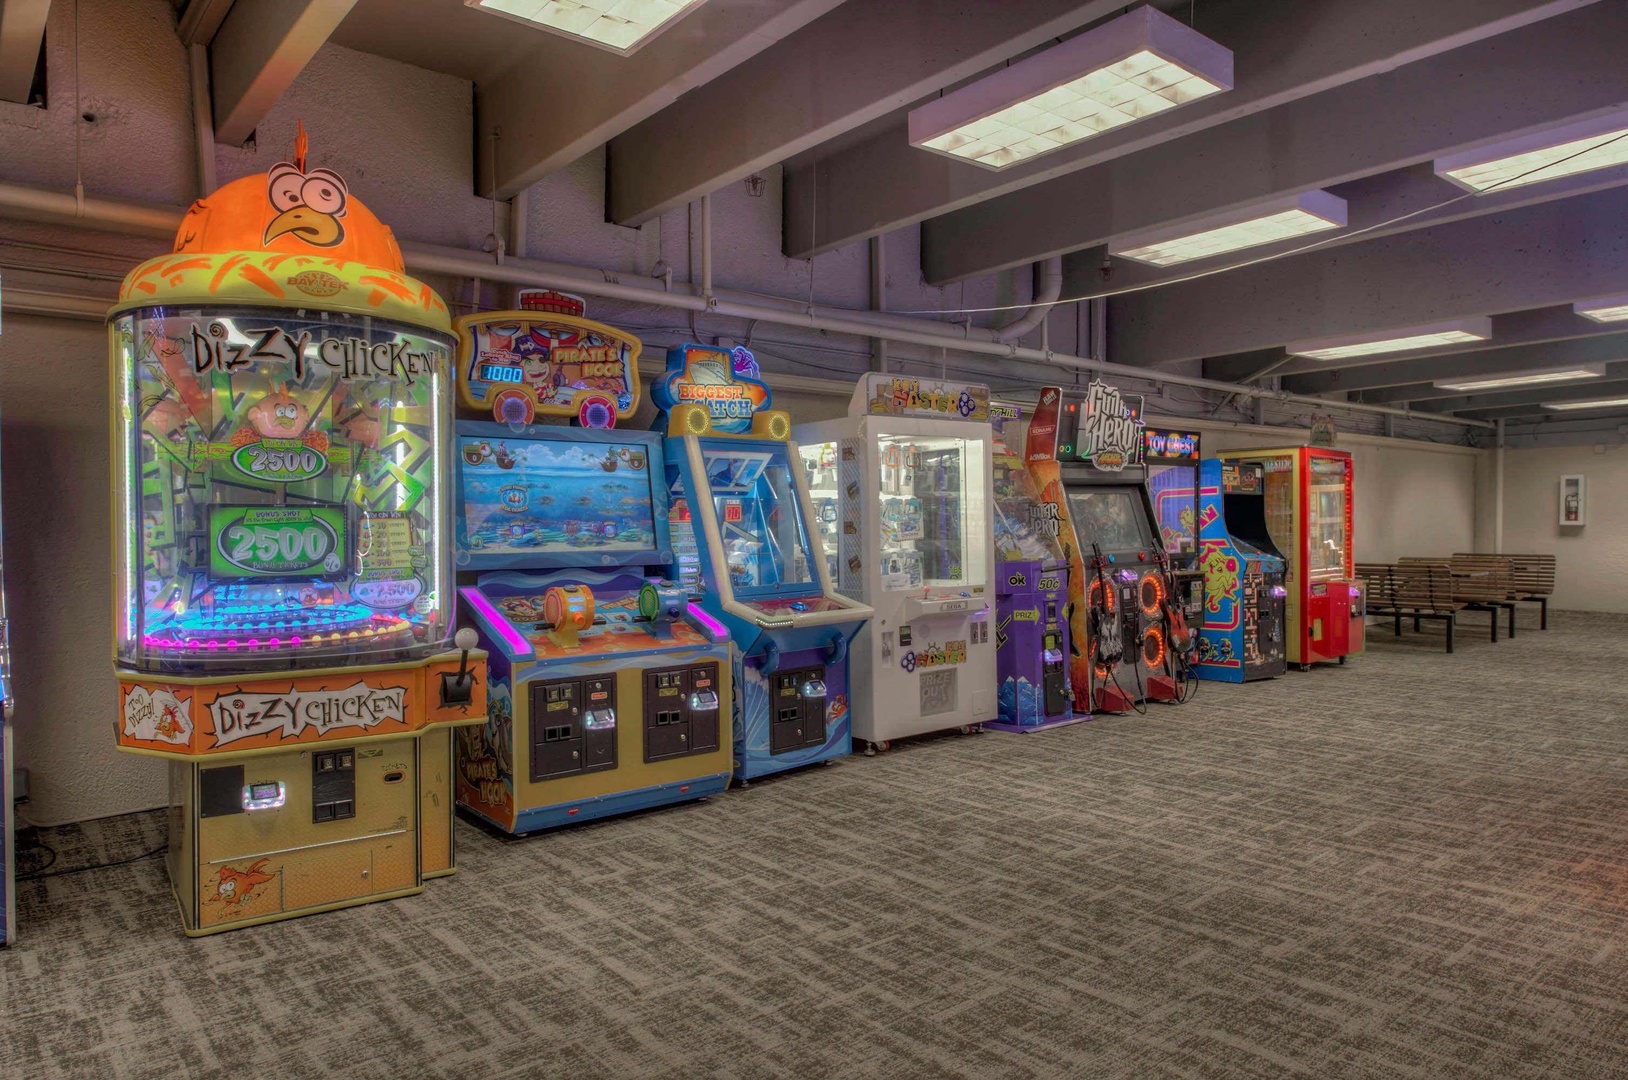 Arcade games, great for the kids